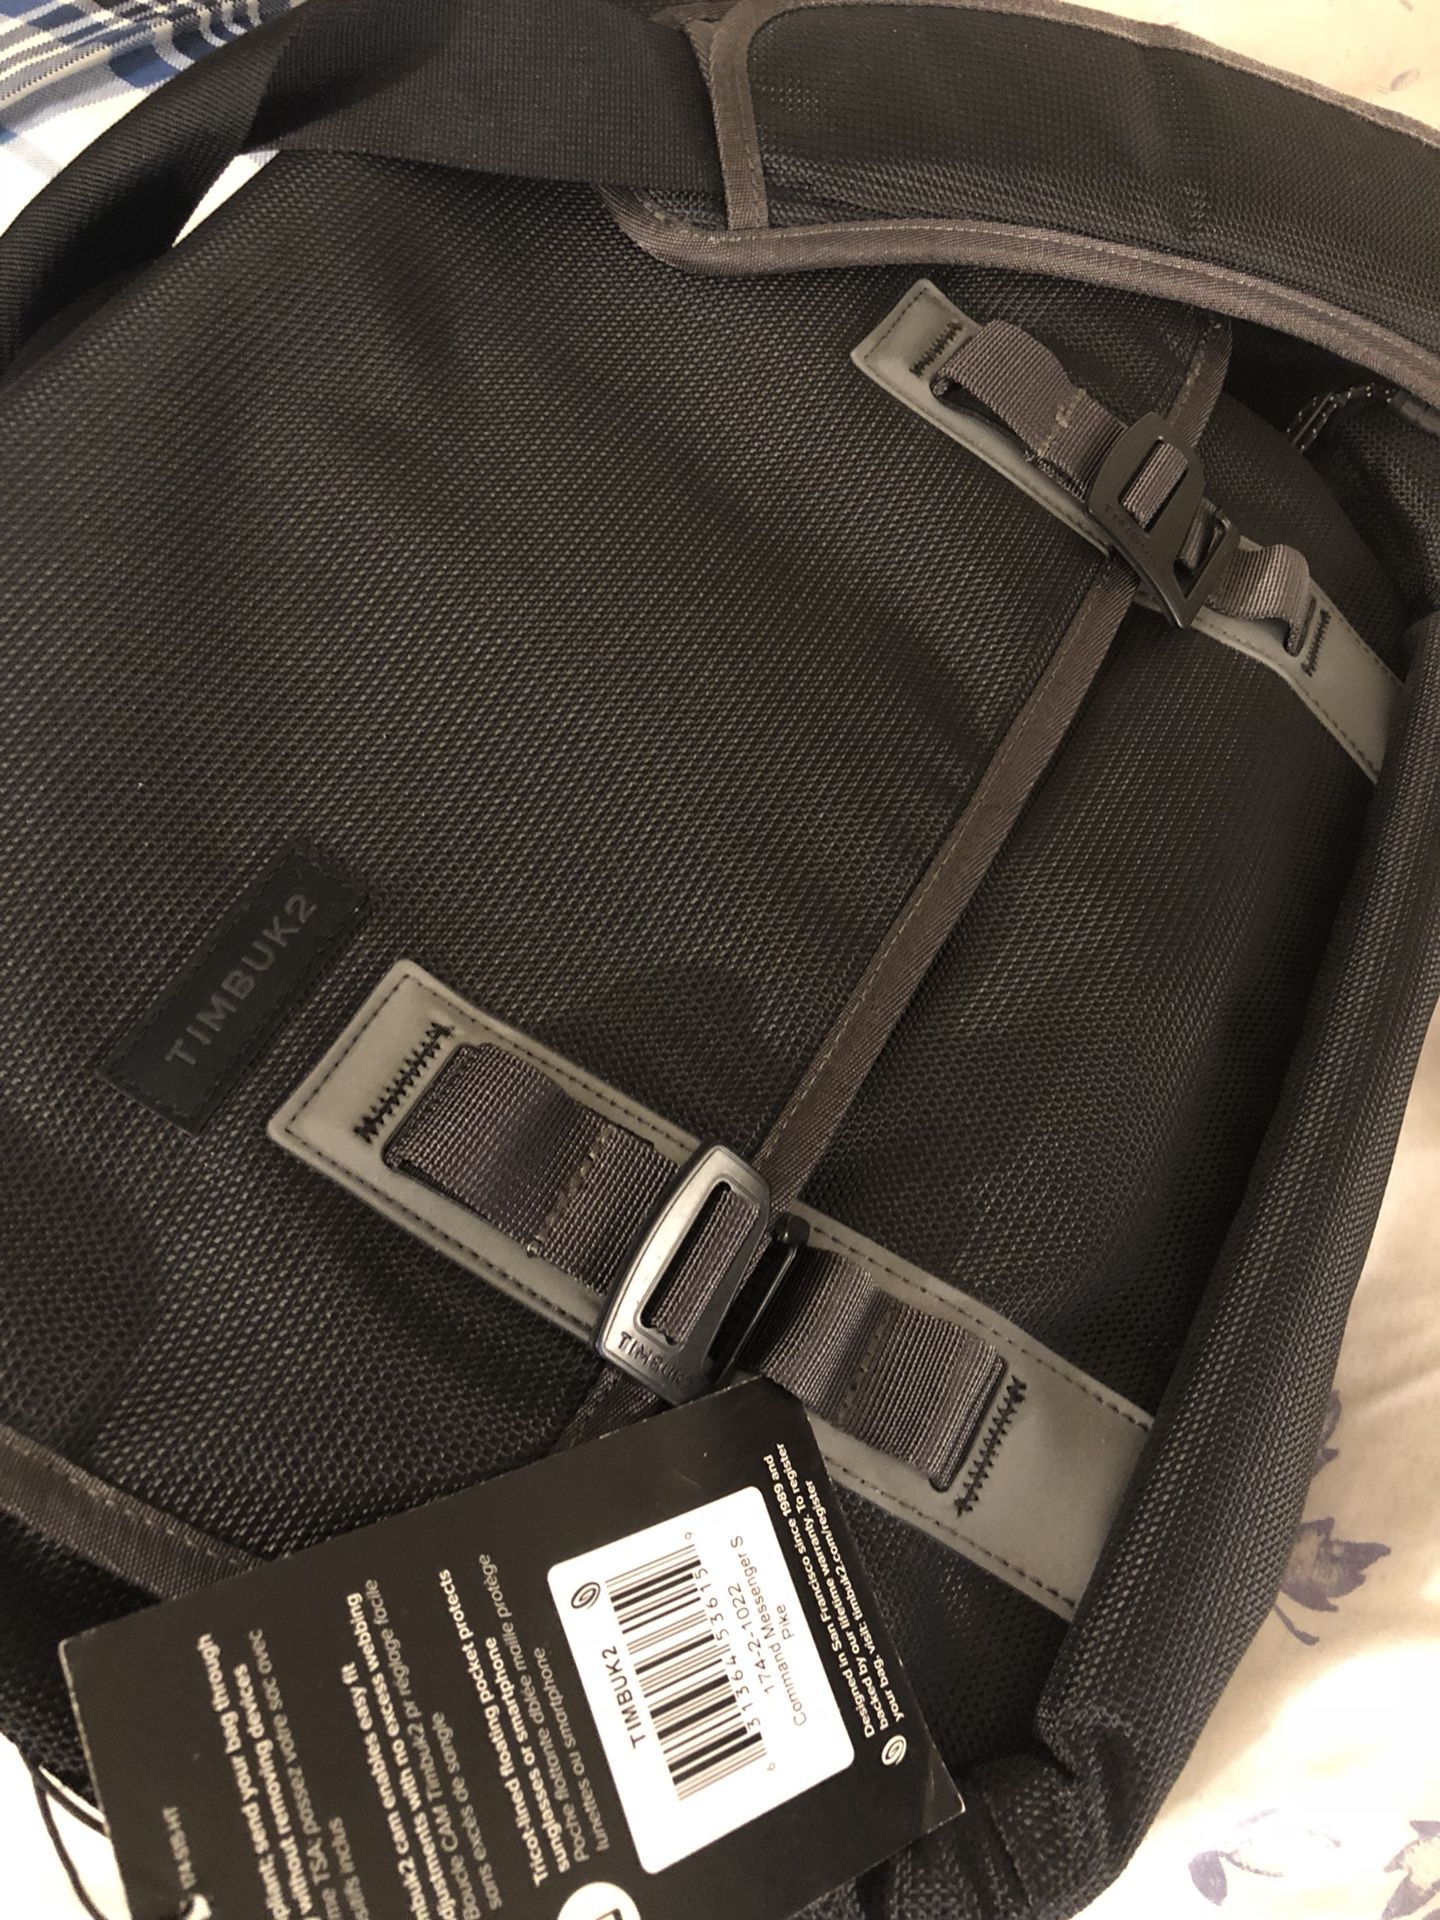 TIMBUK2 COMMAND MESSENGER BAG NWT for Sale in Las